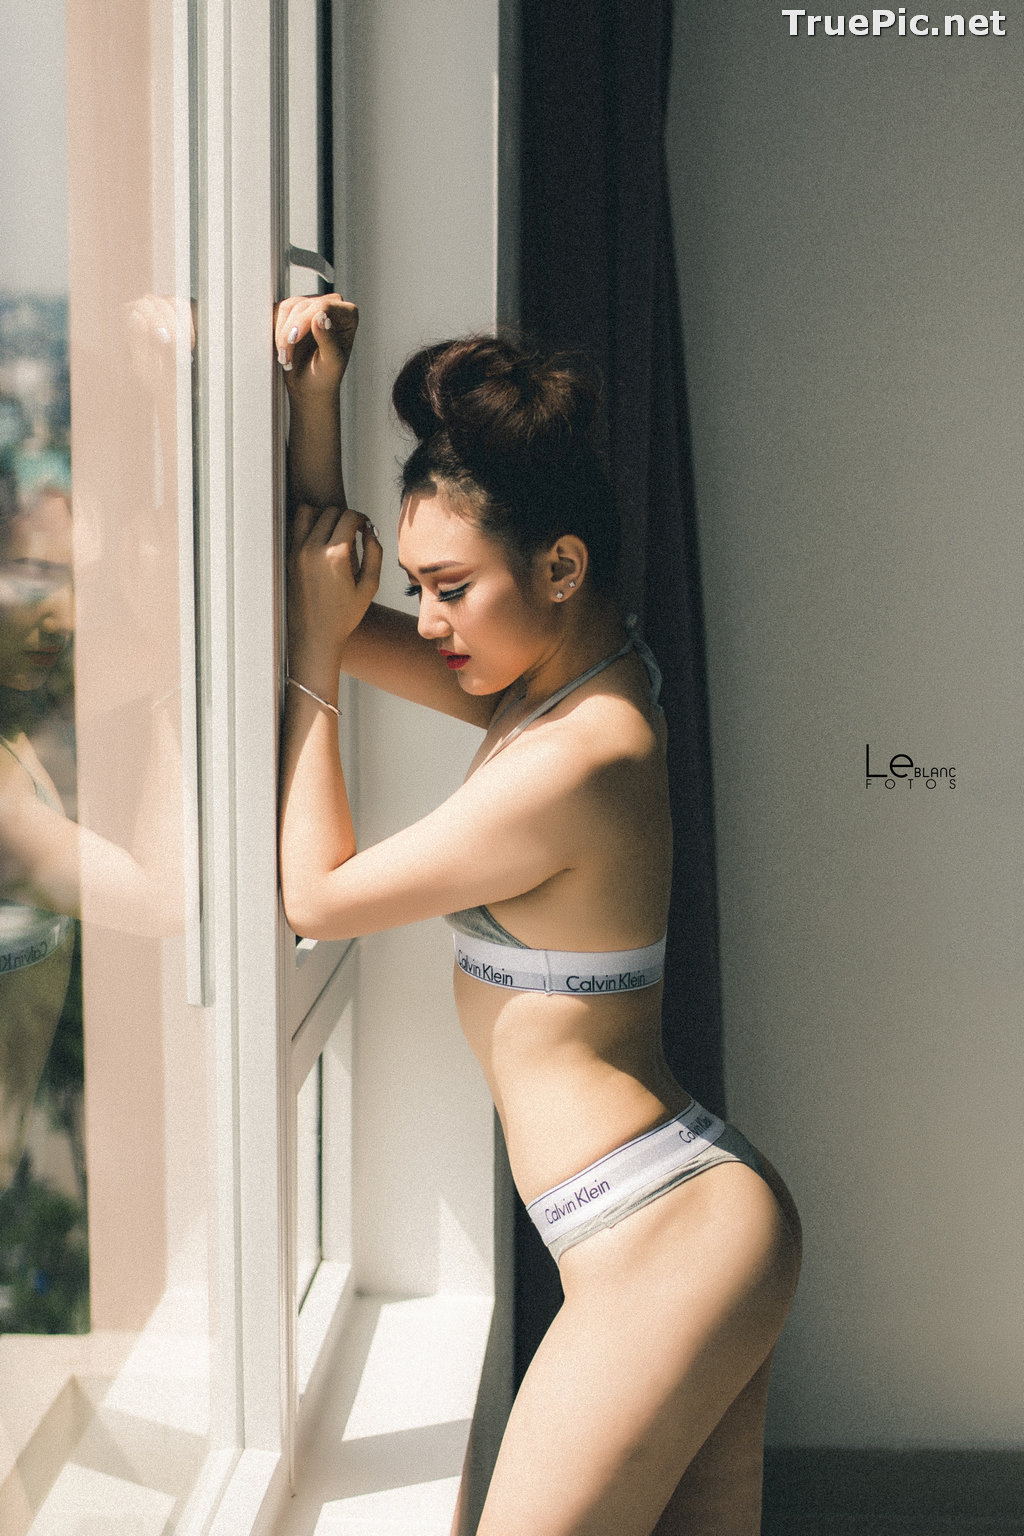 Image Vietnamese Beauties With Lingerie and Bikini – Photo by Le Blanc Studio #11 - TruePic.net - Picture-34